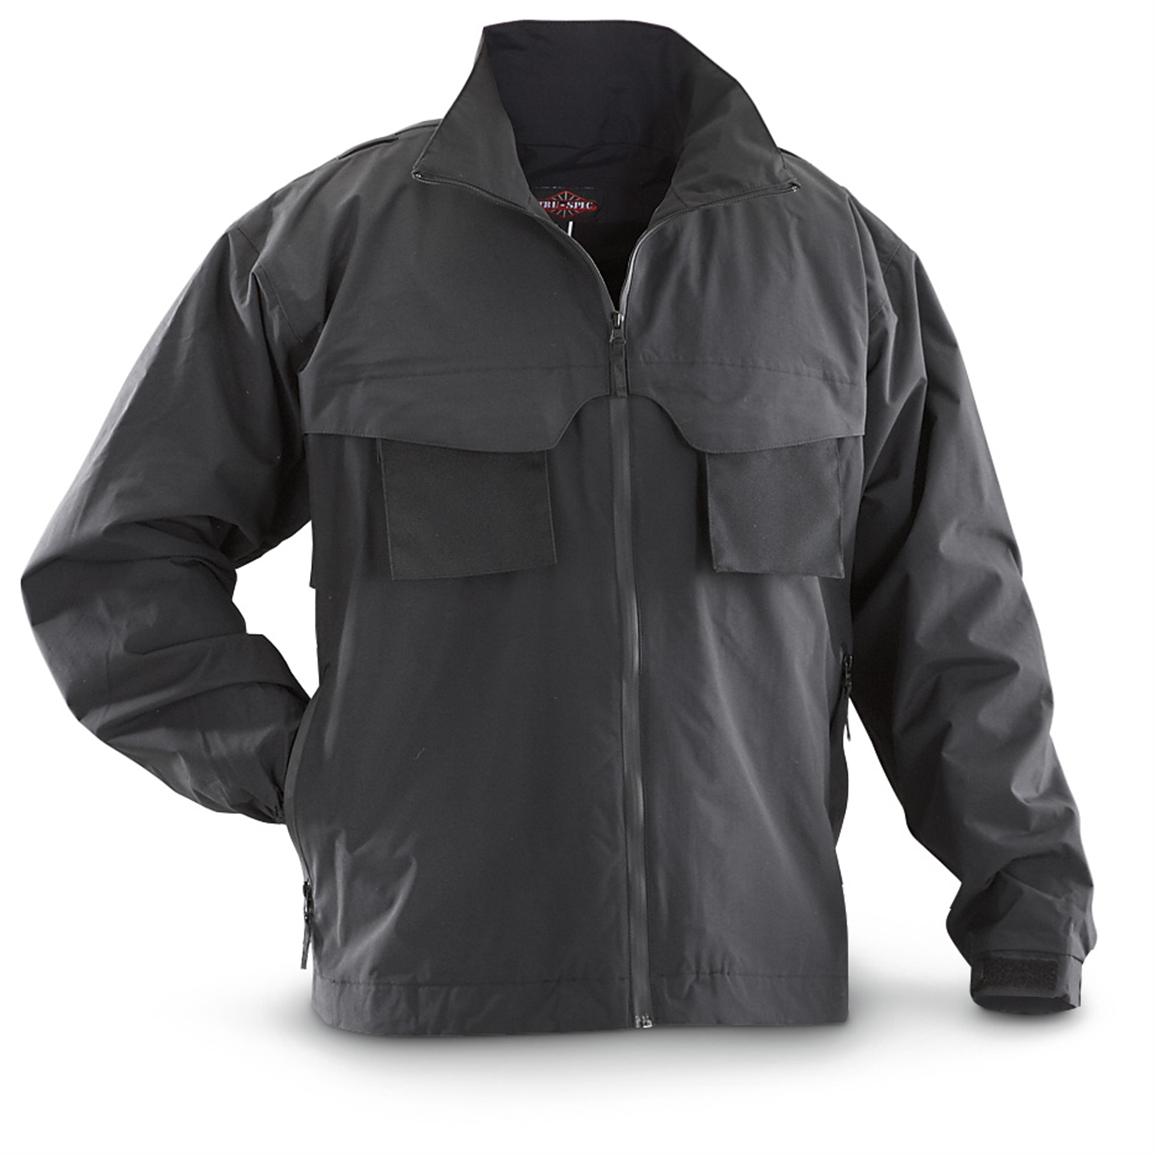 TRU-SPEC® 24-7 Duty Jacket - 582909, Tactical Clothing at Sportsman's Guide